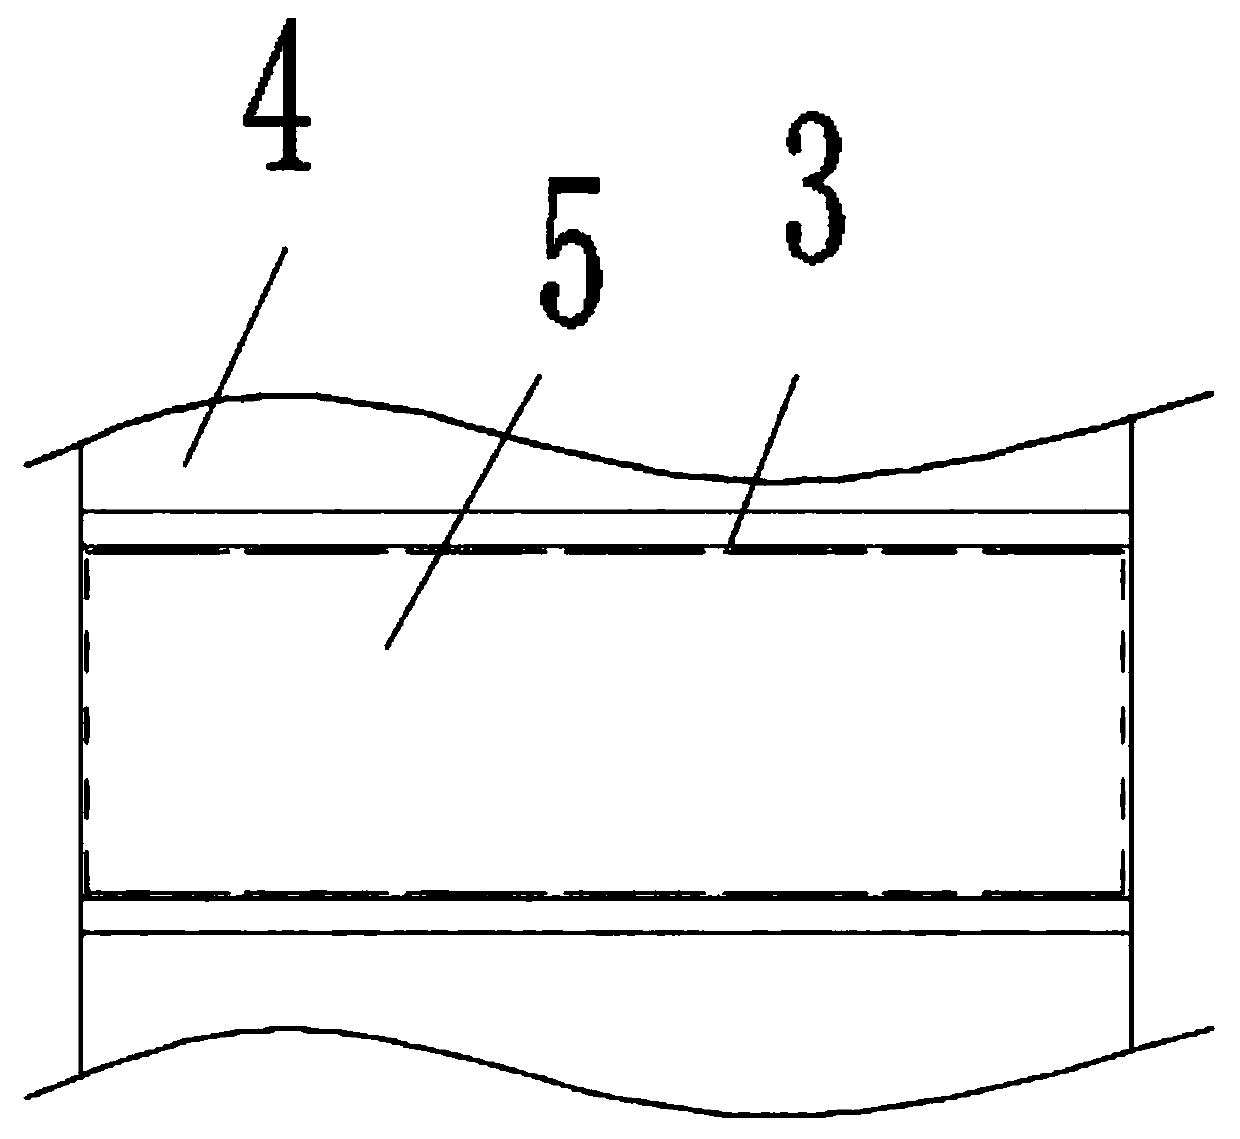 Method for manufacturing composite curtain